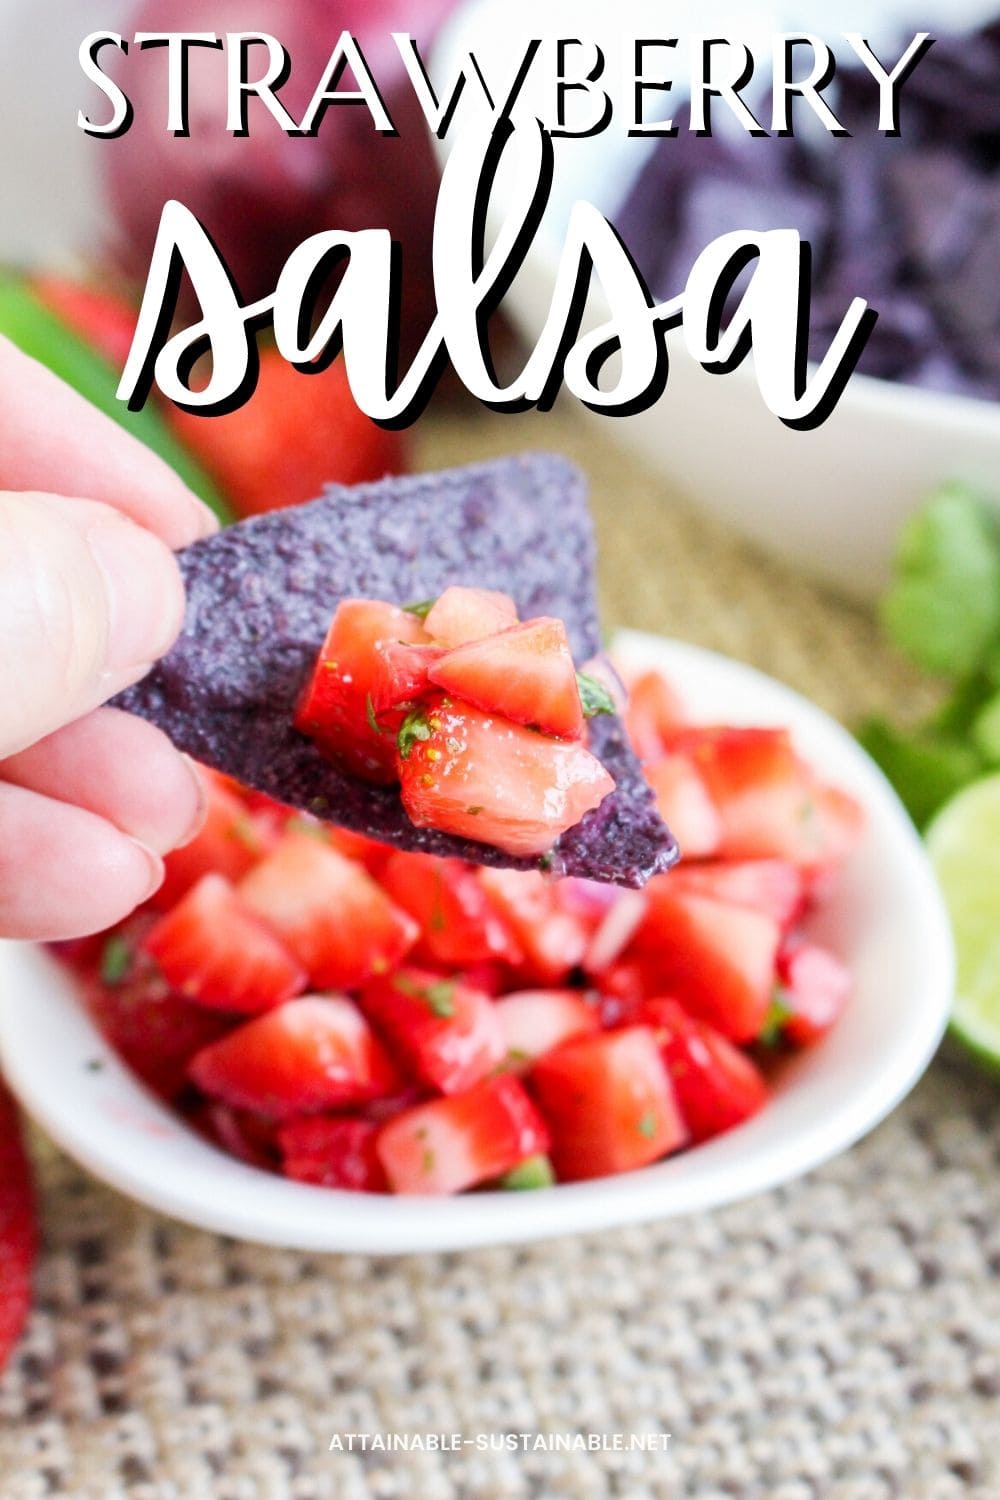 blue corn tortilla chip with salsa on it.